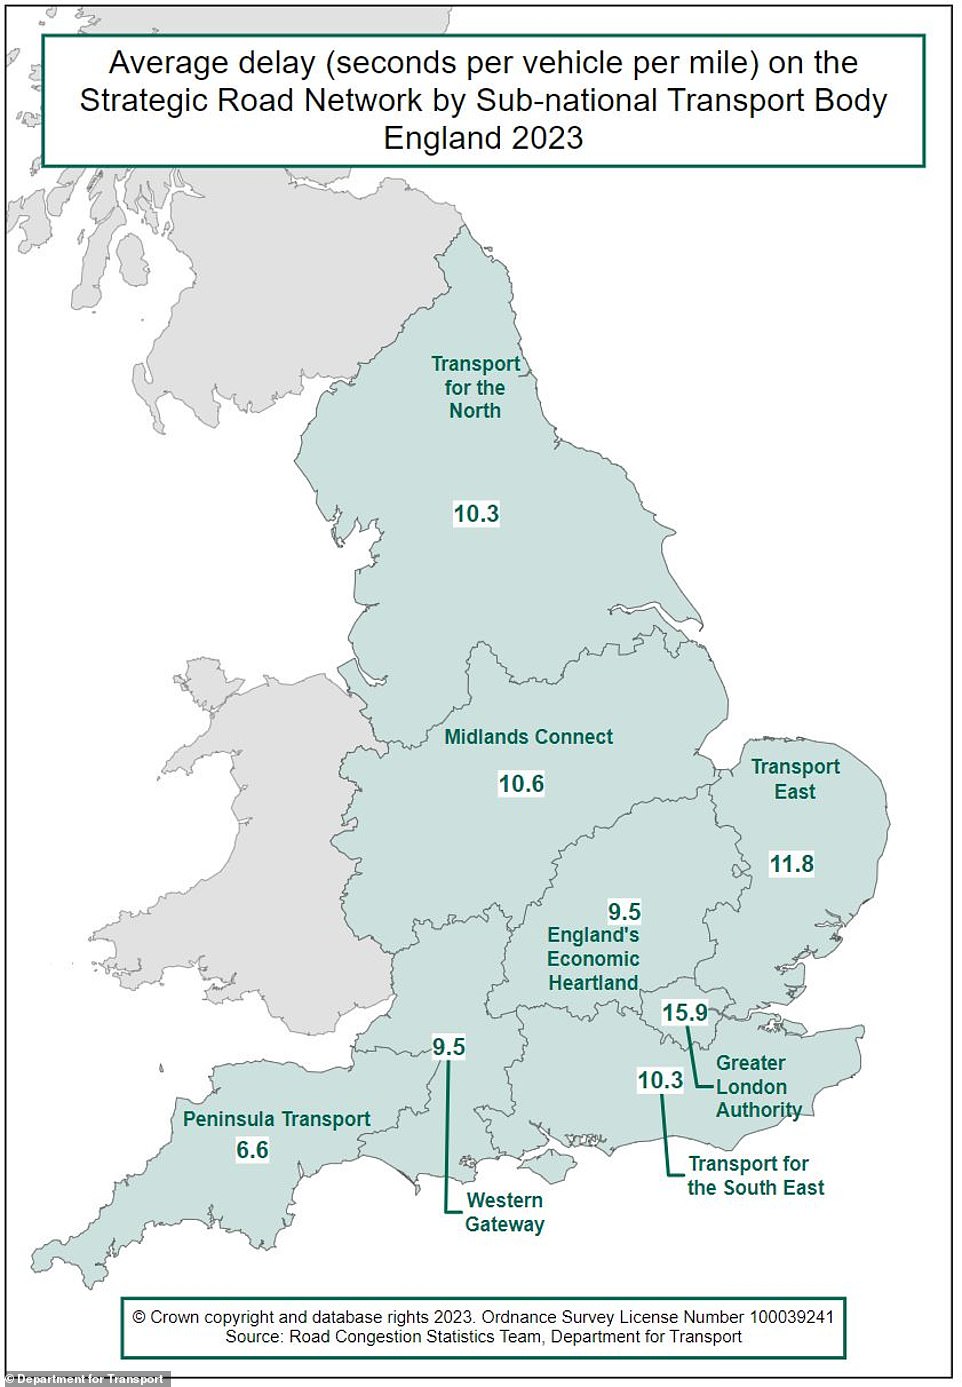 This map infographic shows the regional breakdown of average delay times in each area. Unsurprisingly, London has the longest delays on main roads, at 15.9 seconds per mile.